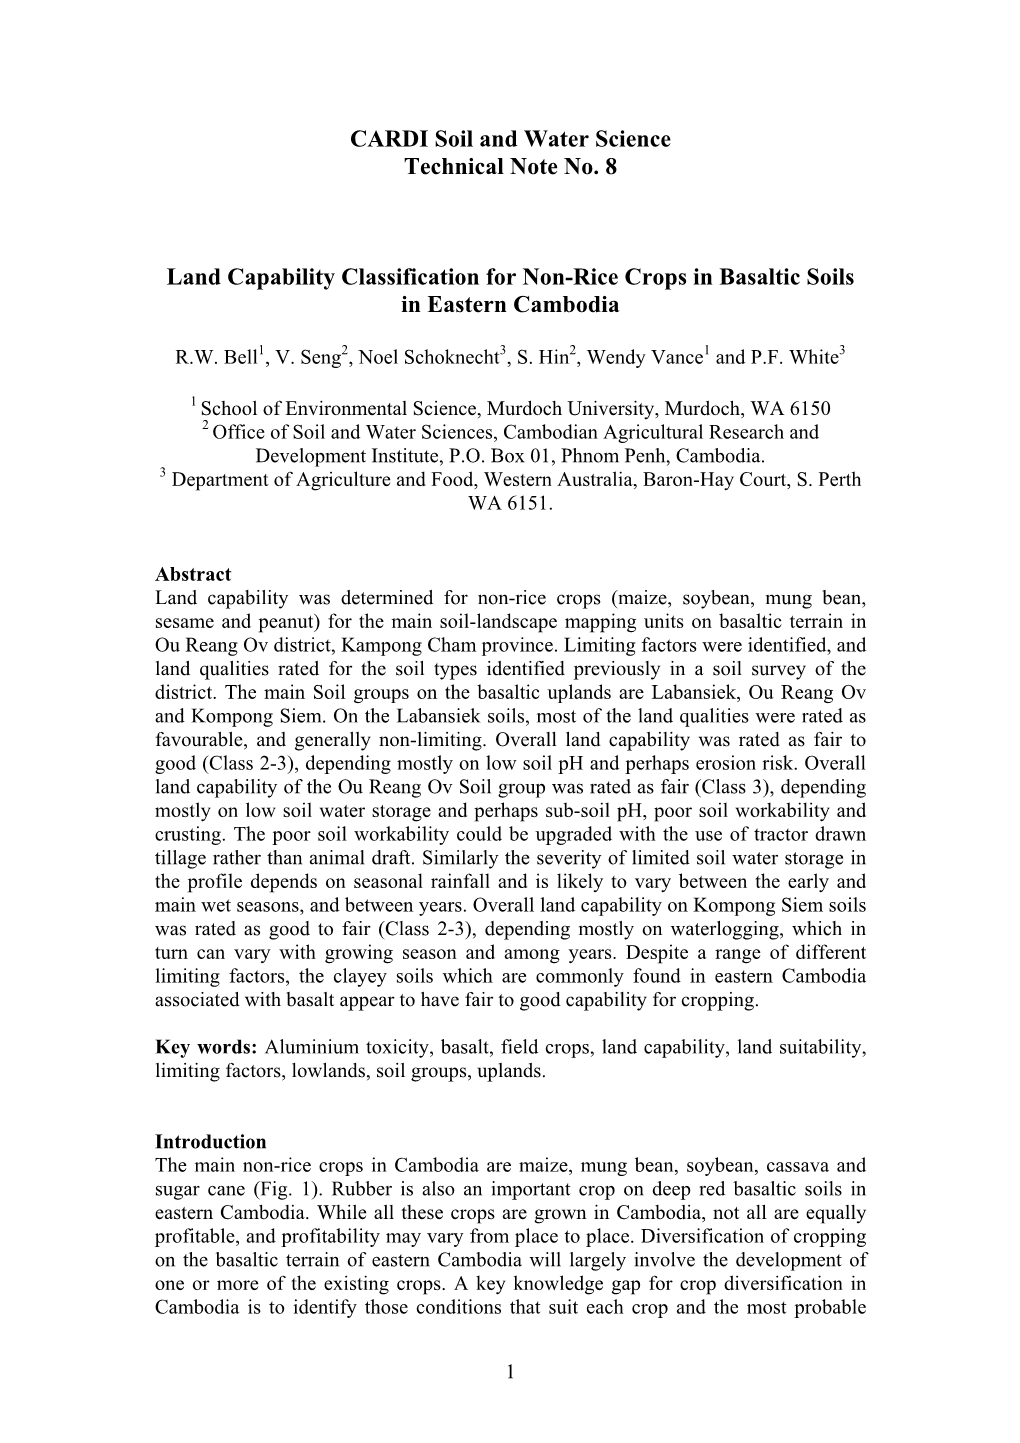 CARDI Soil and Water Science Technical Note No. 8 Land Capability Classification for Non-Rice Crops in Basaltic Soils in Eastern